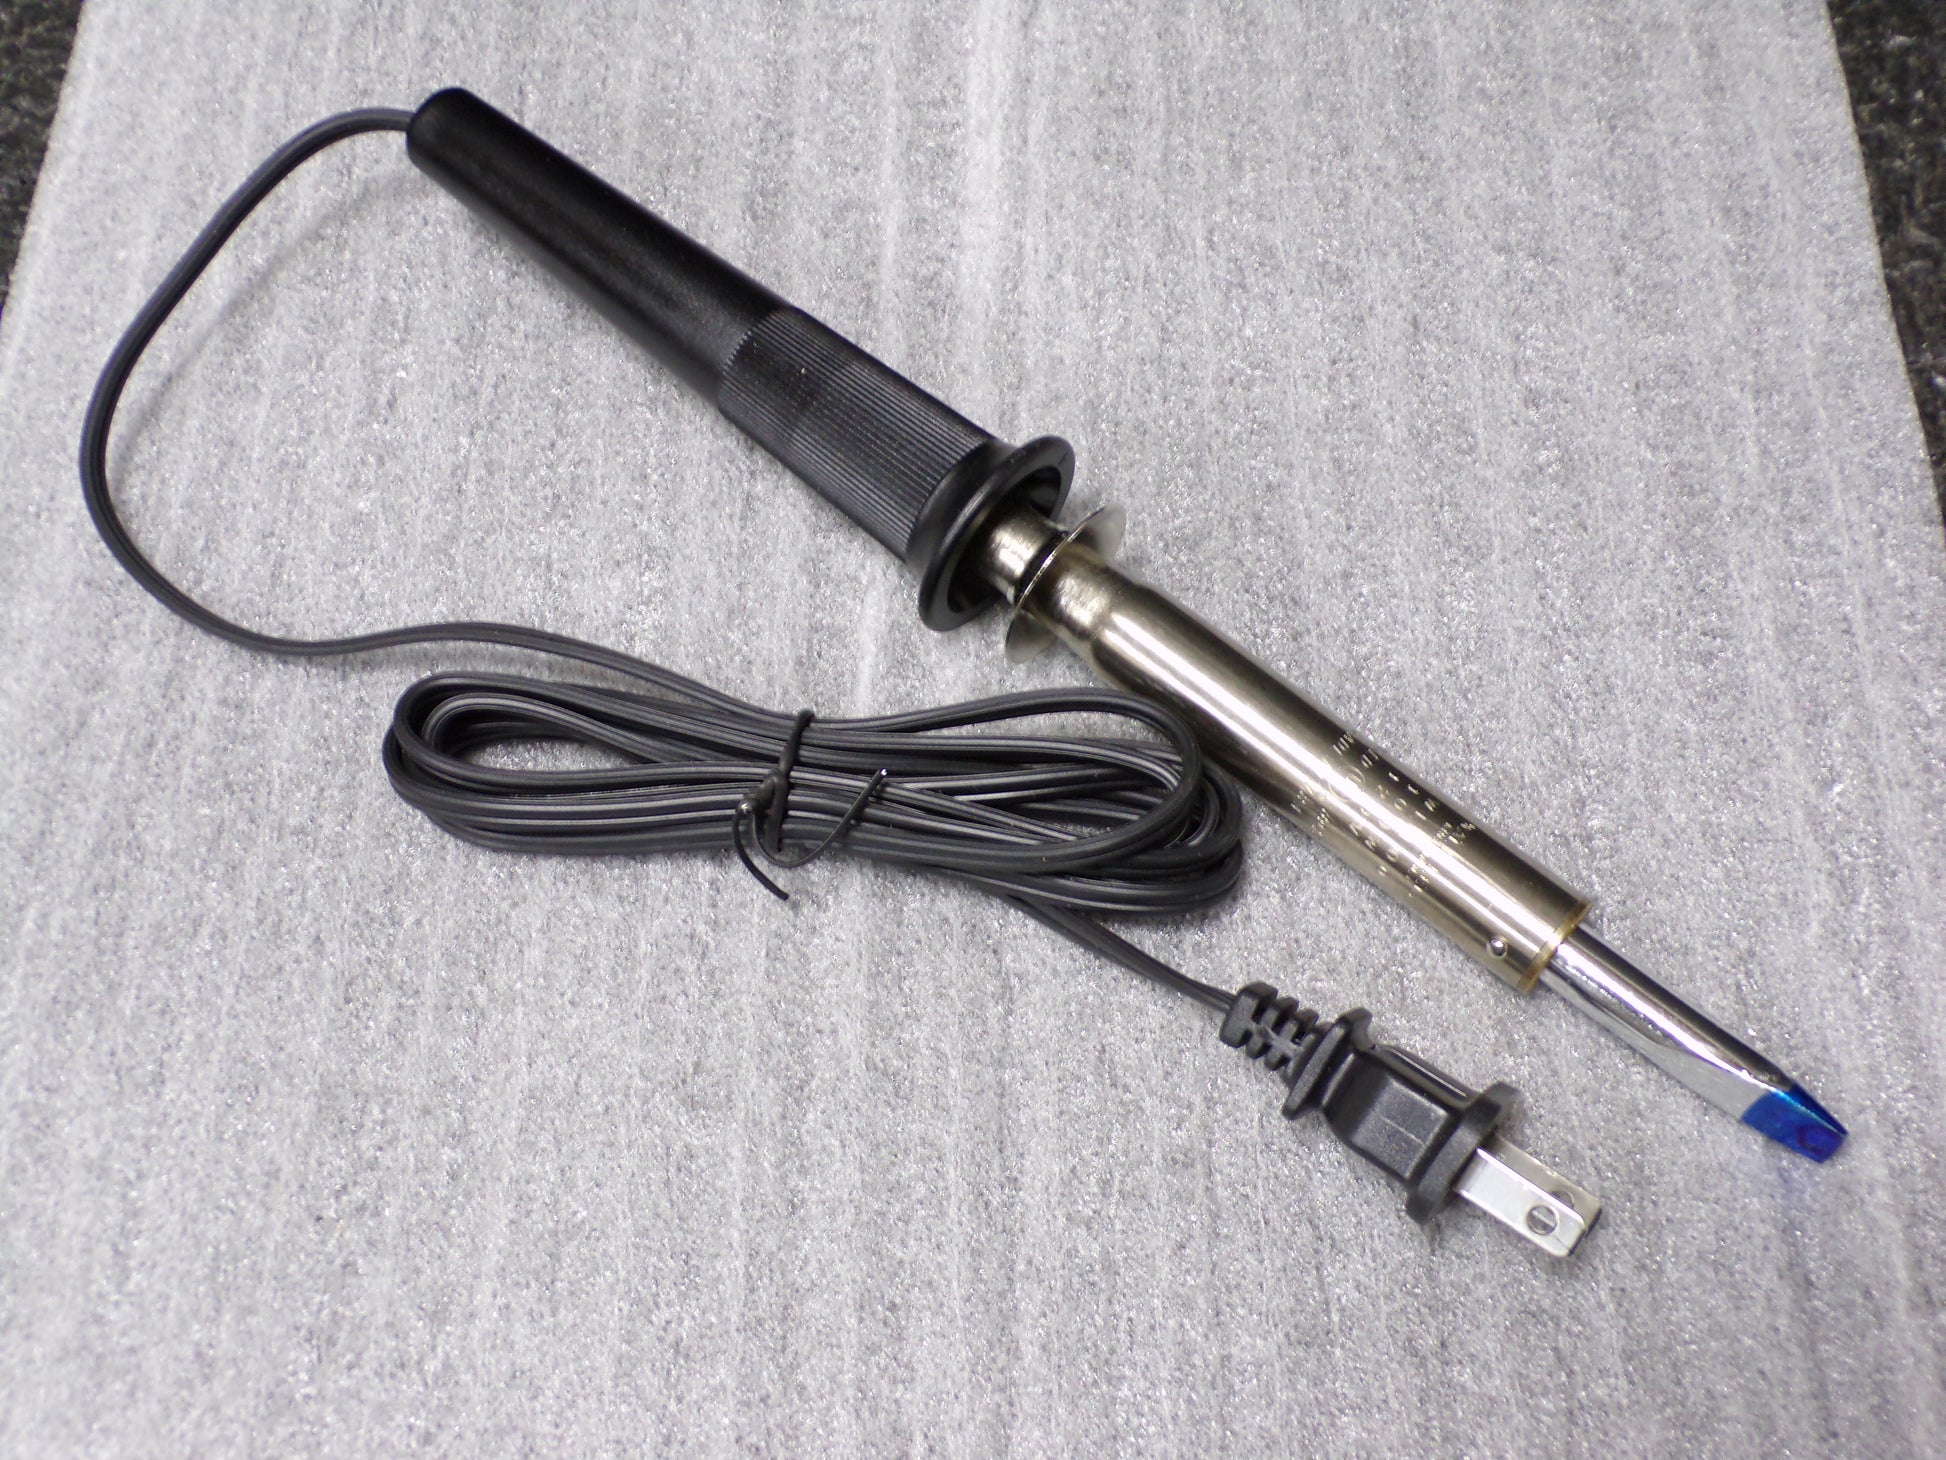 Wall Lenk Stained Glass Soldering Iron, 0 to 100 Watts, 120V. (CR00083 –